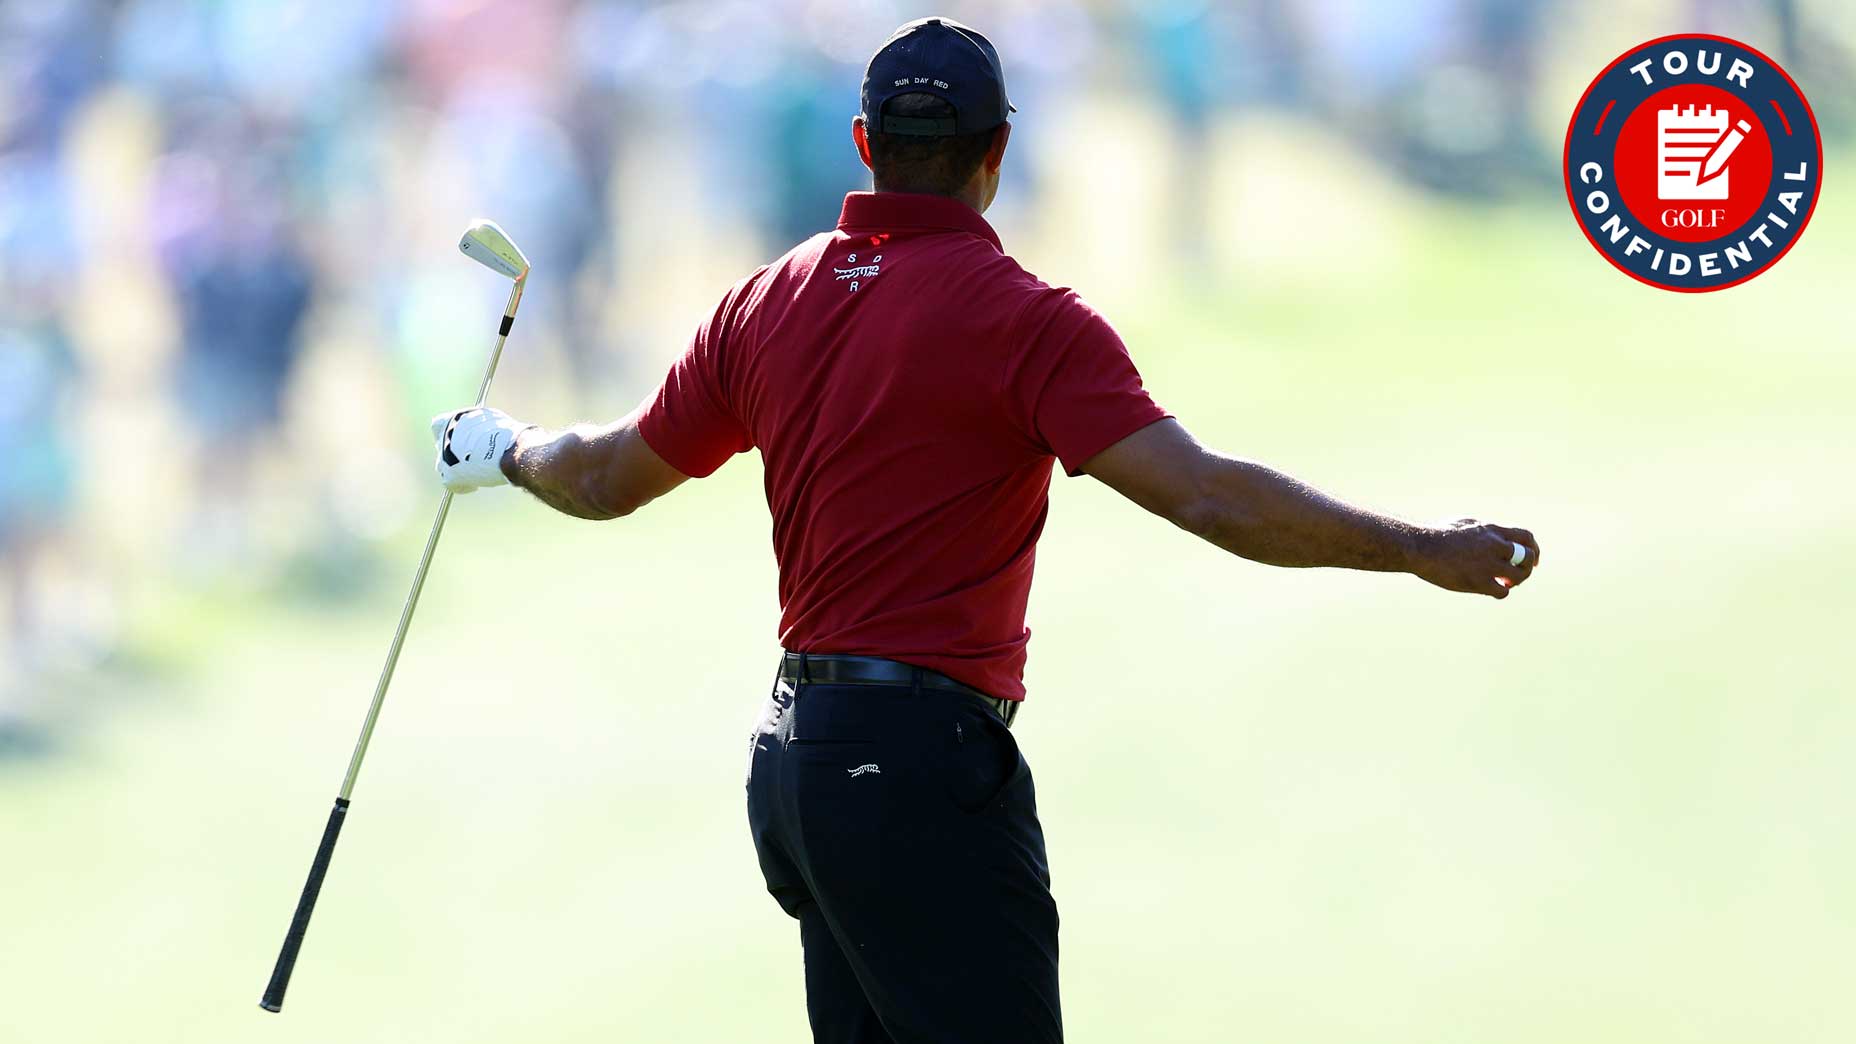 Tiger Woods reacts to his shot at the Masters